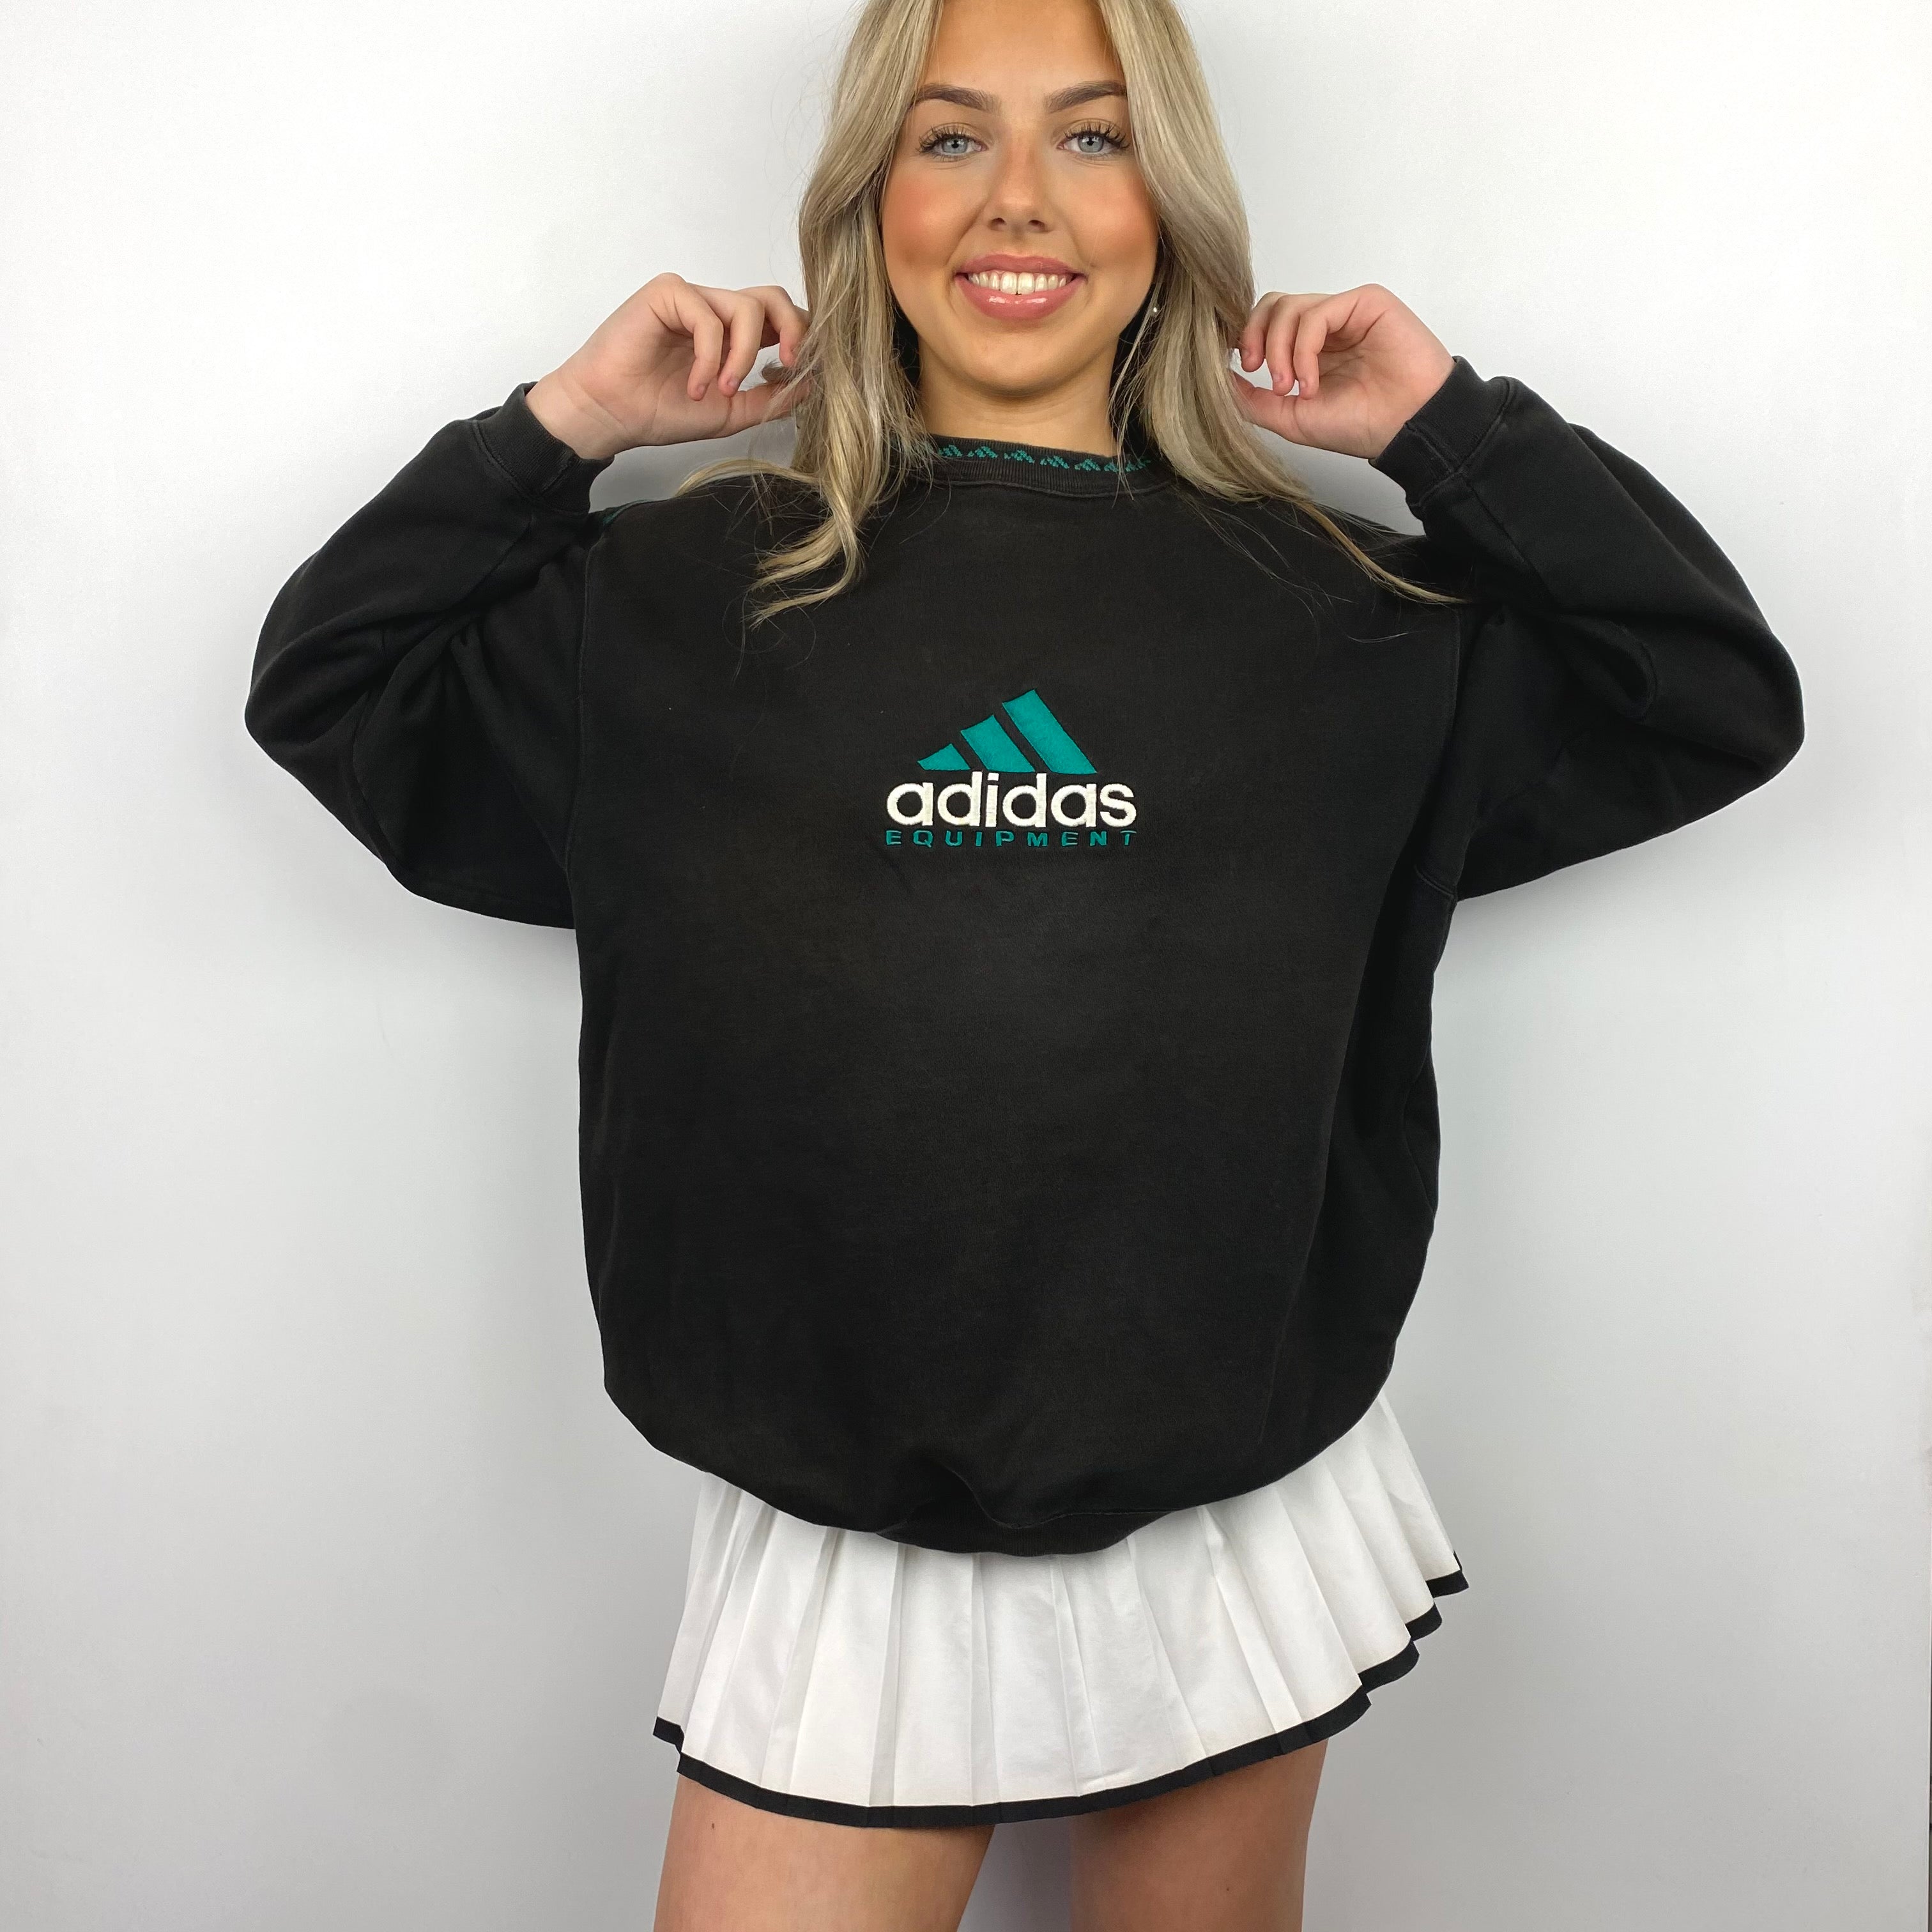 Adidas Equipment EQT RARE Black Embroidered Spell Out Sweatshirt (M)